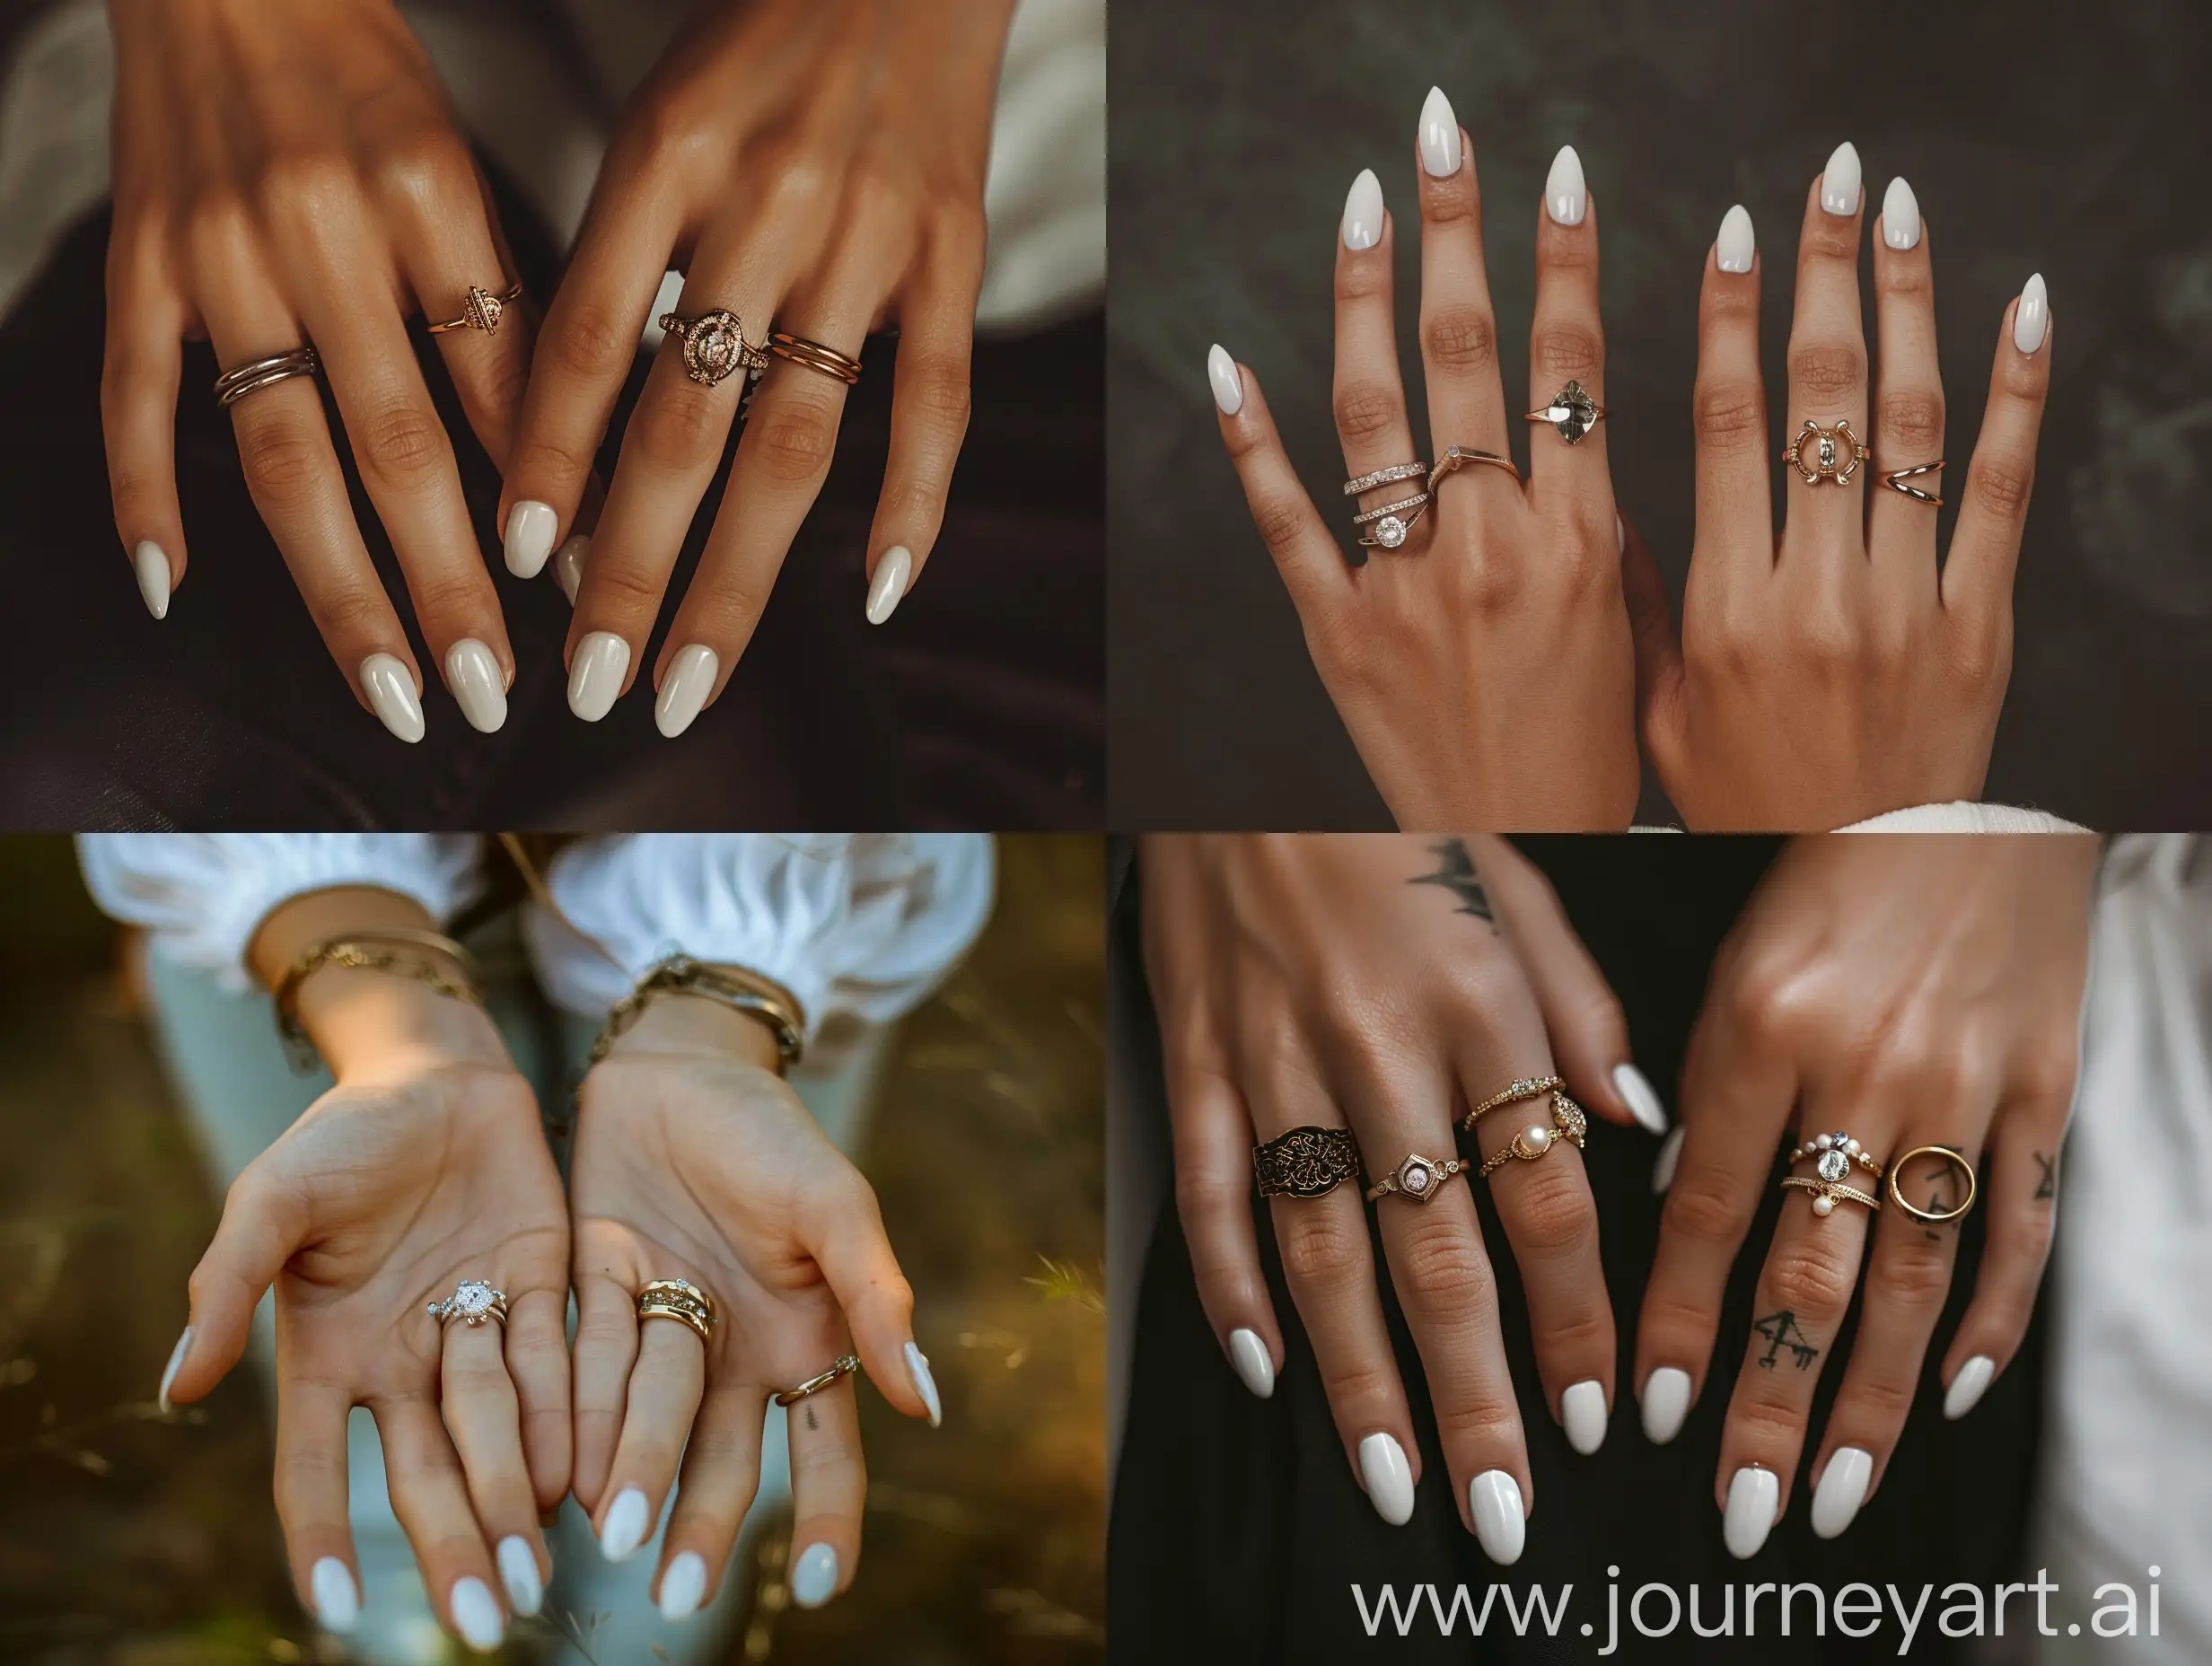 CloseUp-Aesthetic-Photograph-of-Trendy-Teenage-Girl-Hands-with-Rings-and-Gel-Nail-Polish